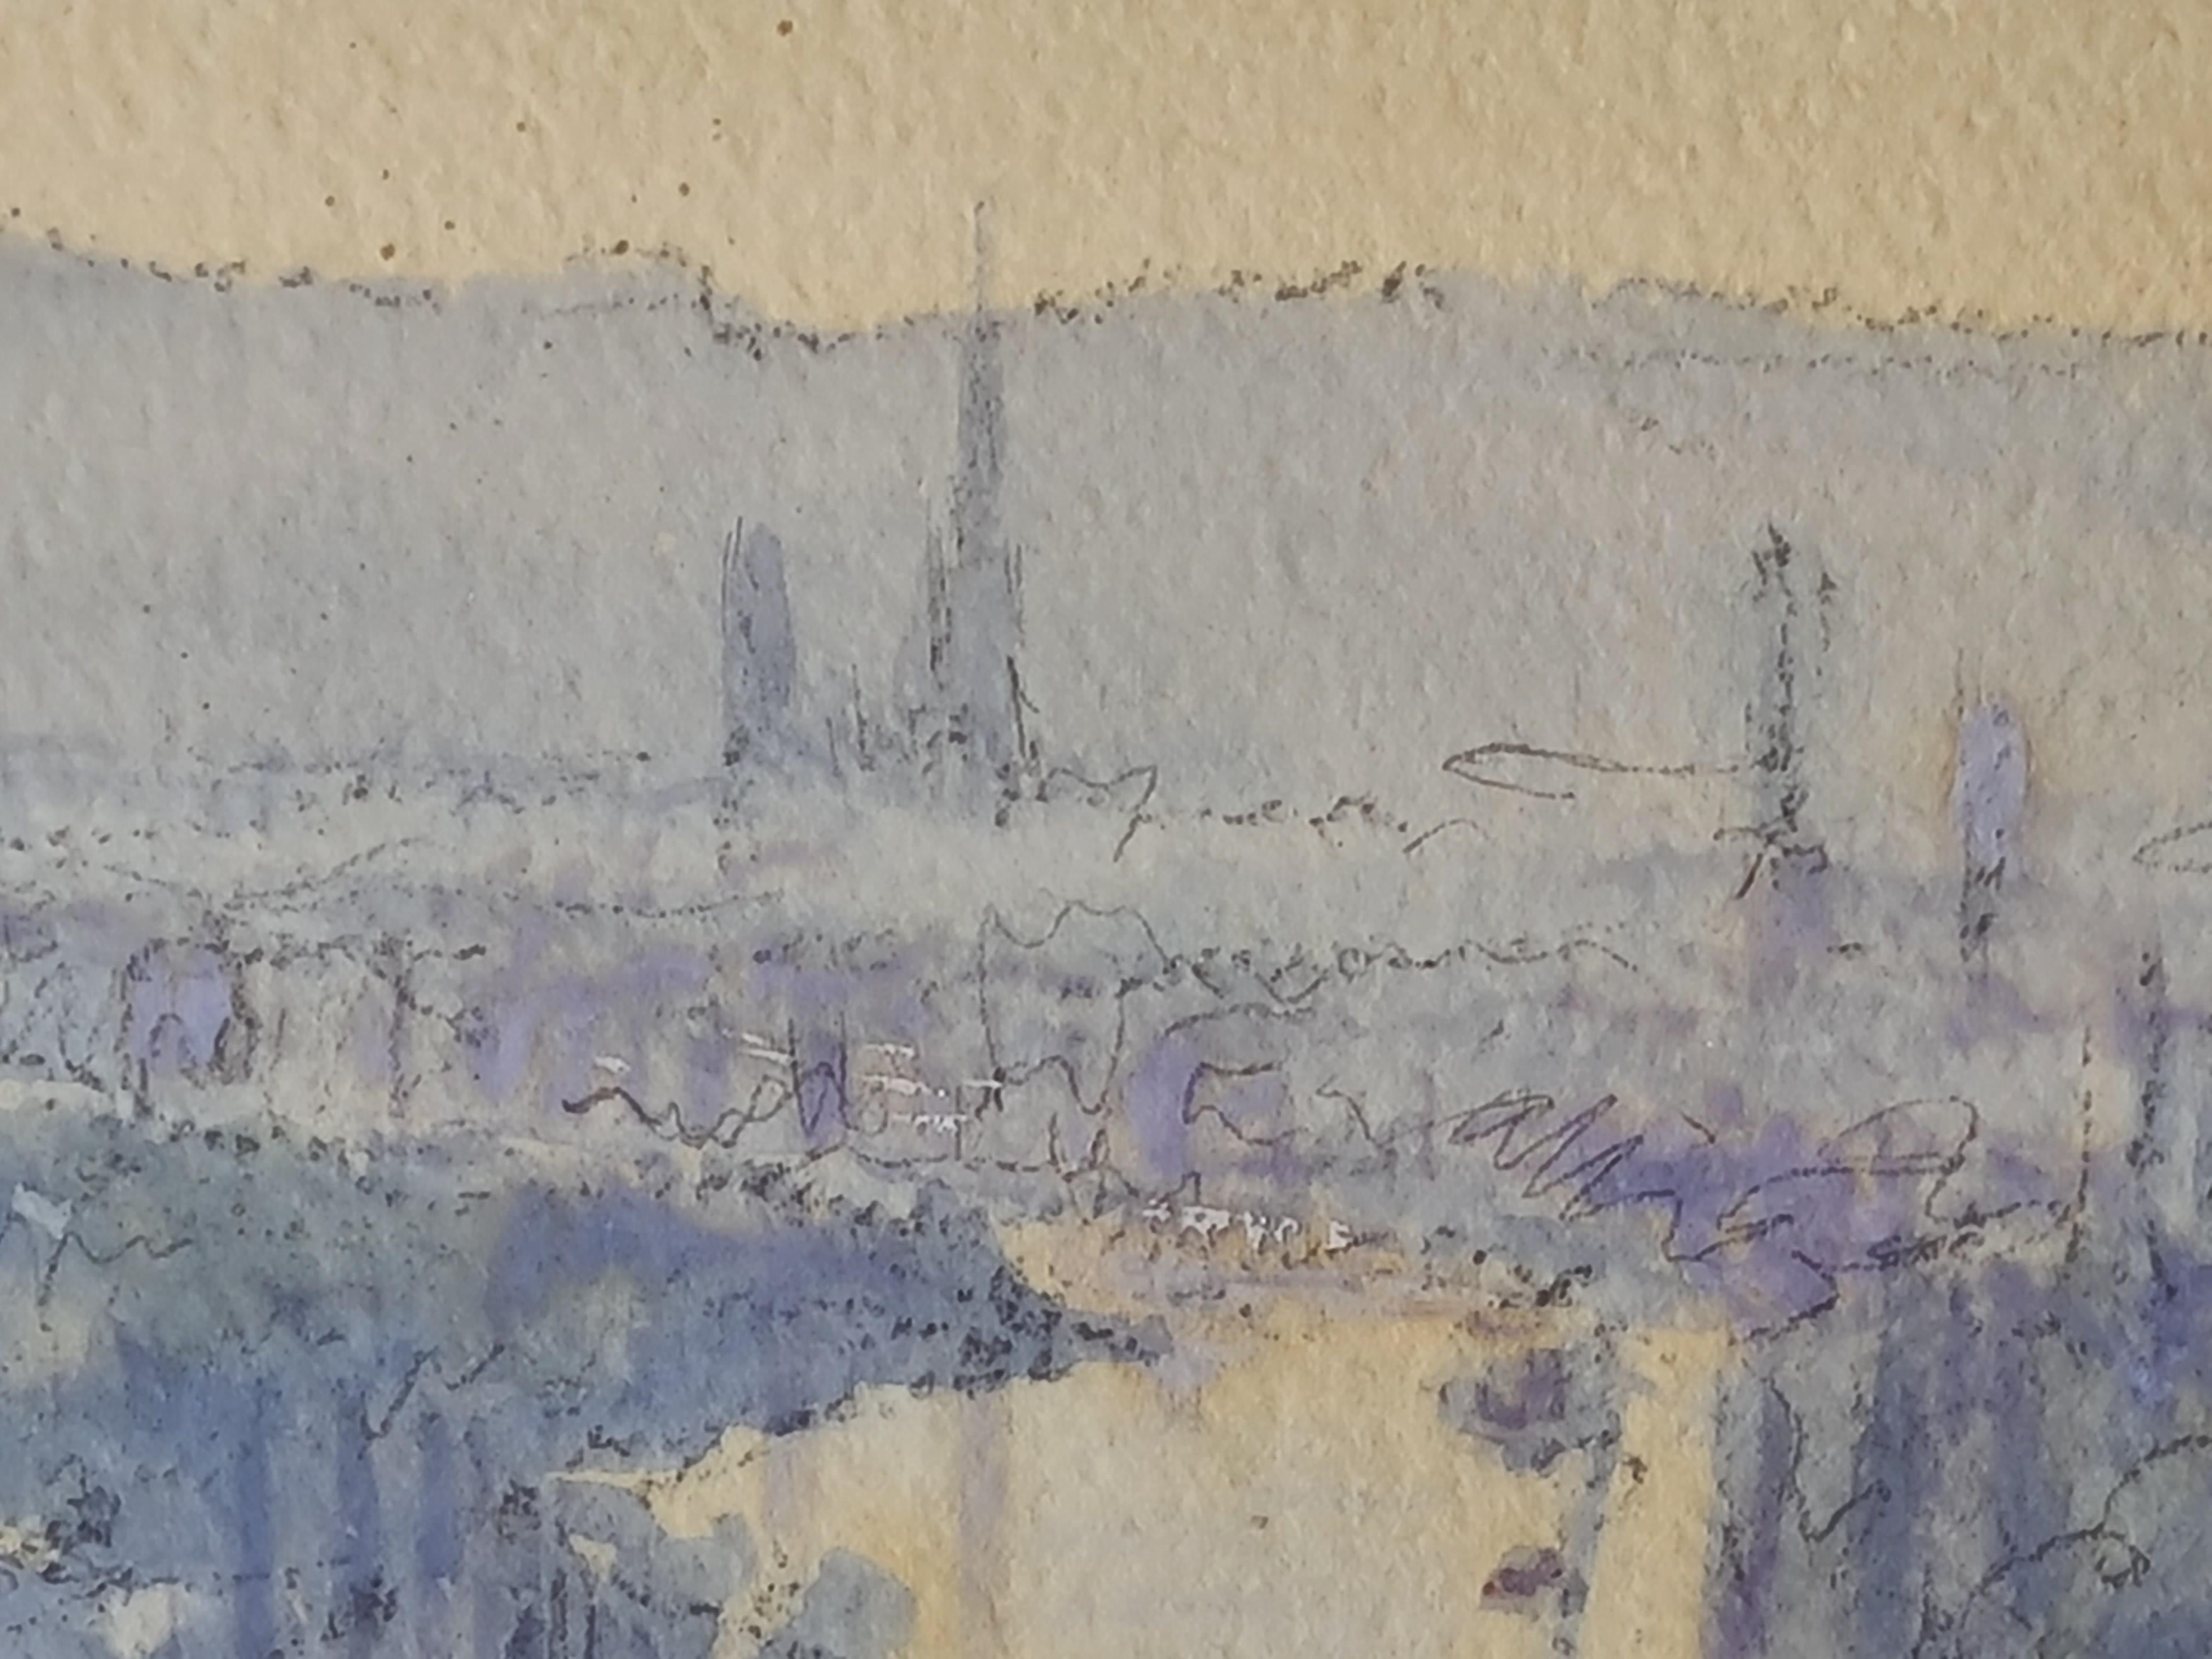 An early 20th Century drawing and watercolour view of the city and riverscape at Rouen by French artist Georges Planes. The work is signed and dated bottom right in red ink. There is also a watermark and oval stamp for 'Arches' paper. The painting